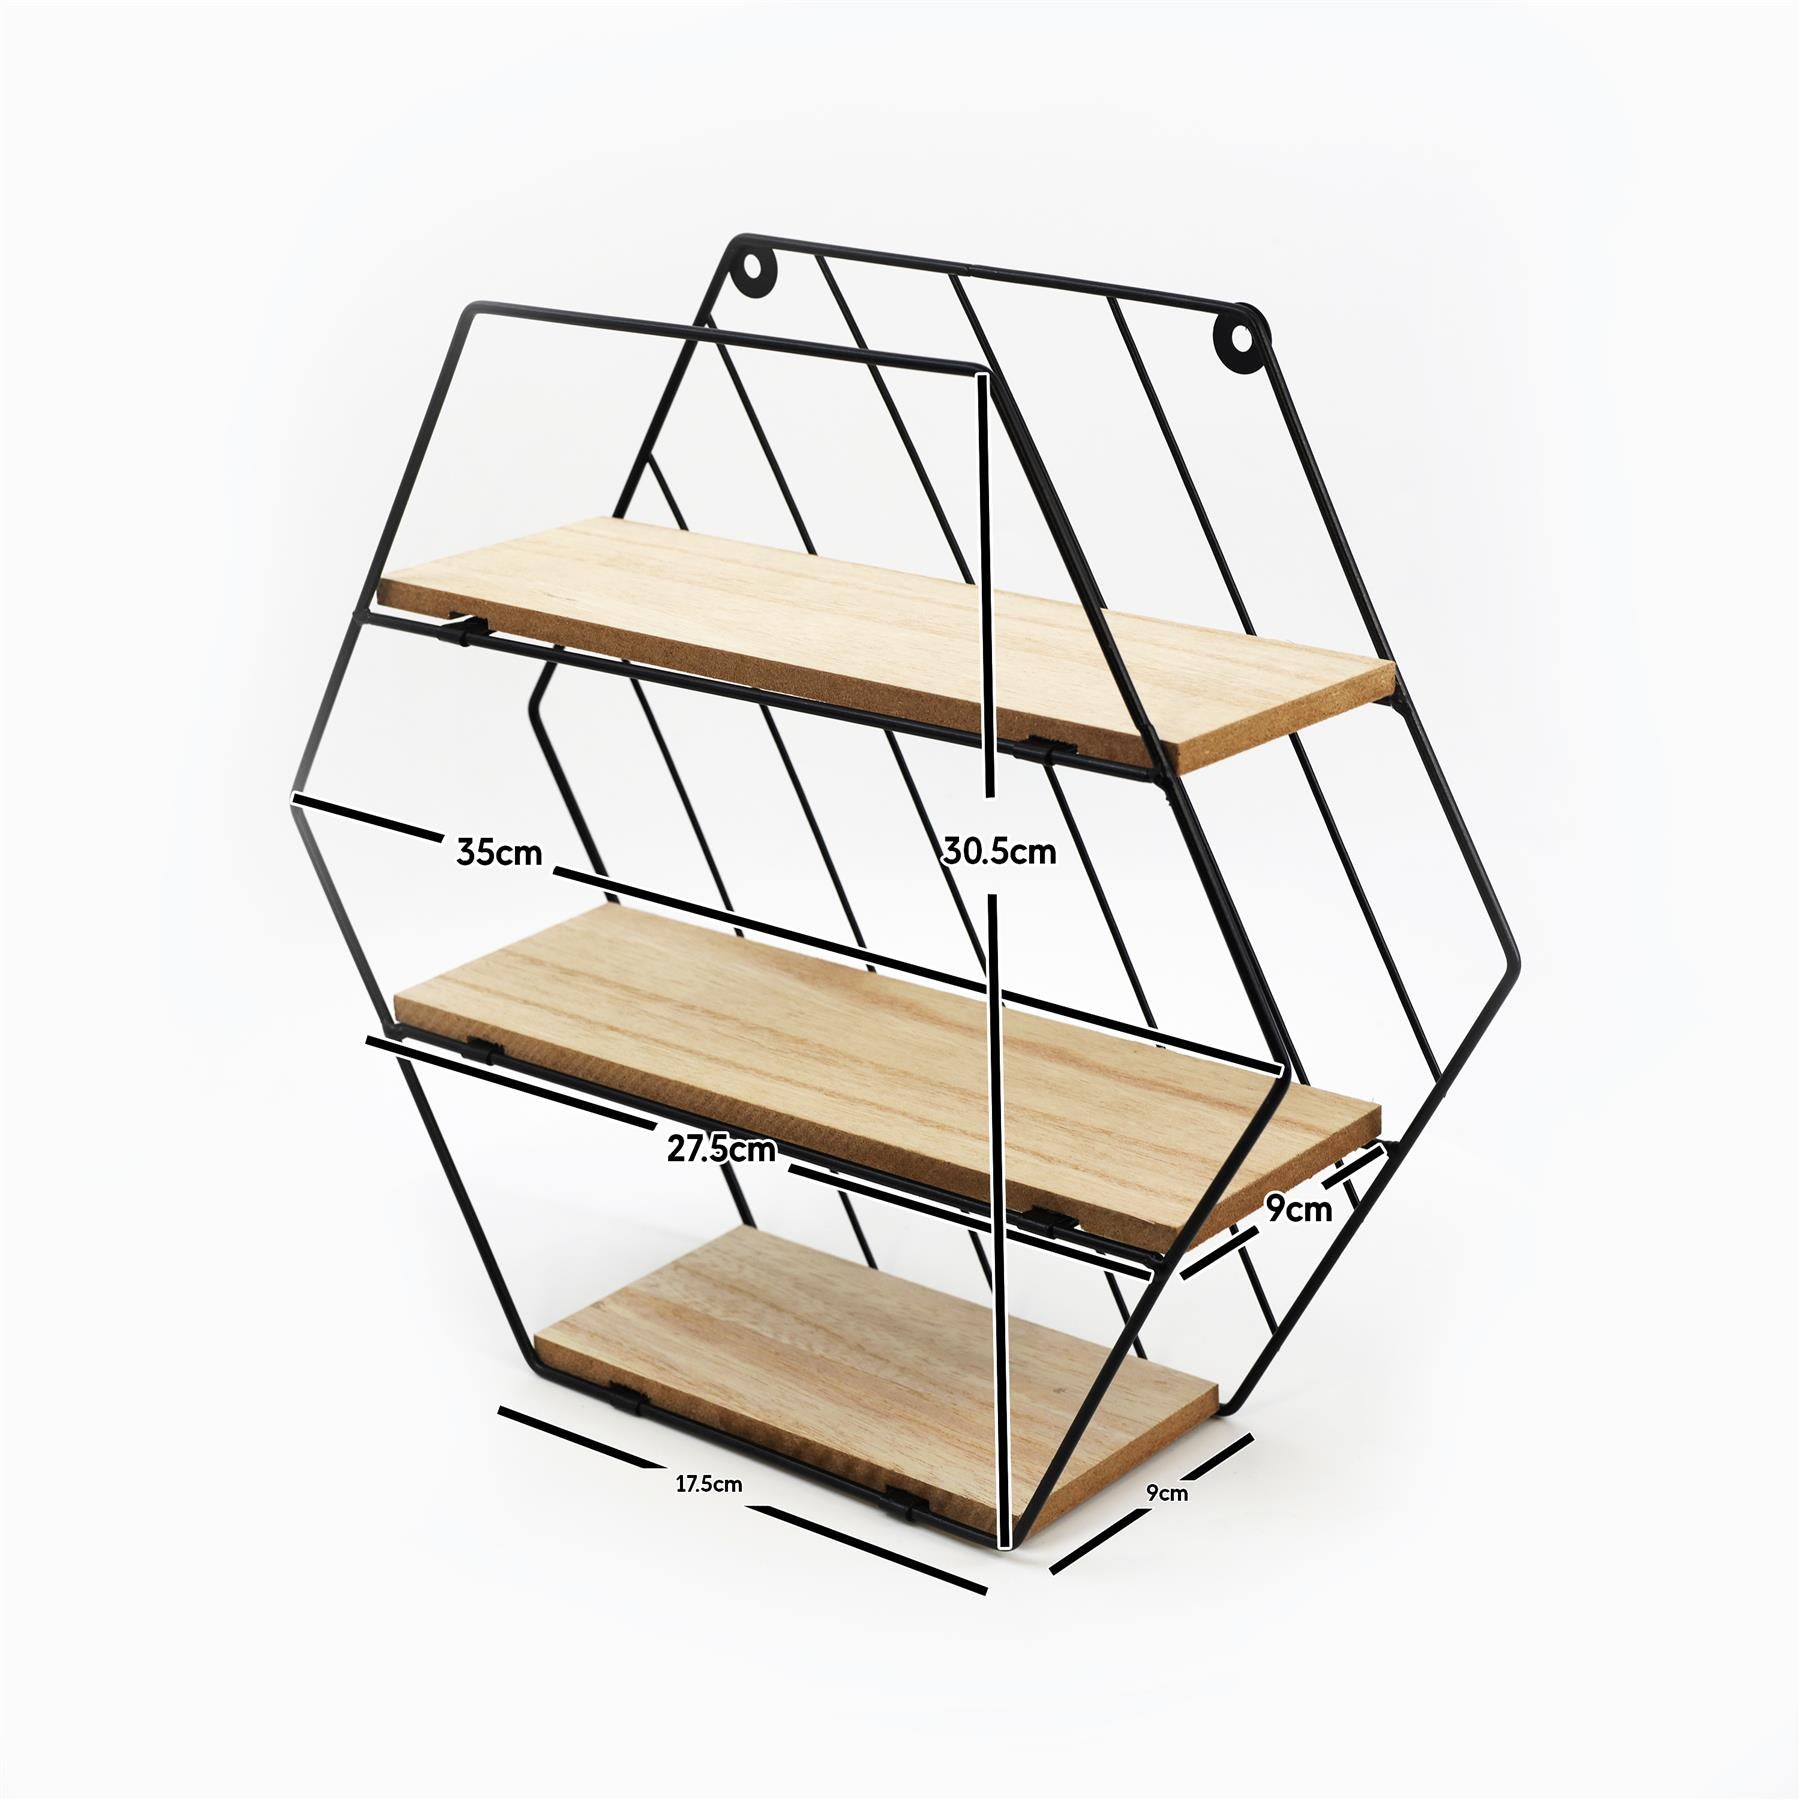 Modern Shelf of Metal Wire and Wood Perfect for Storaging Small Items by Geezy - The Magic Toy Shop